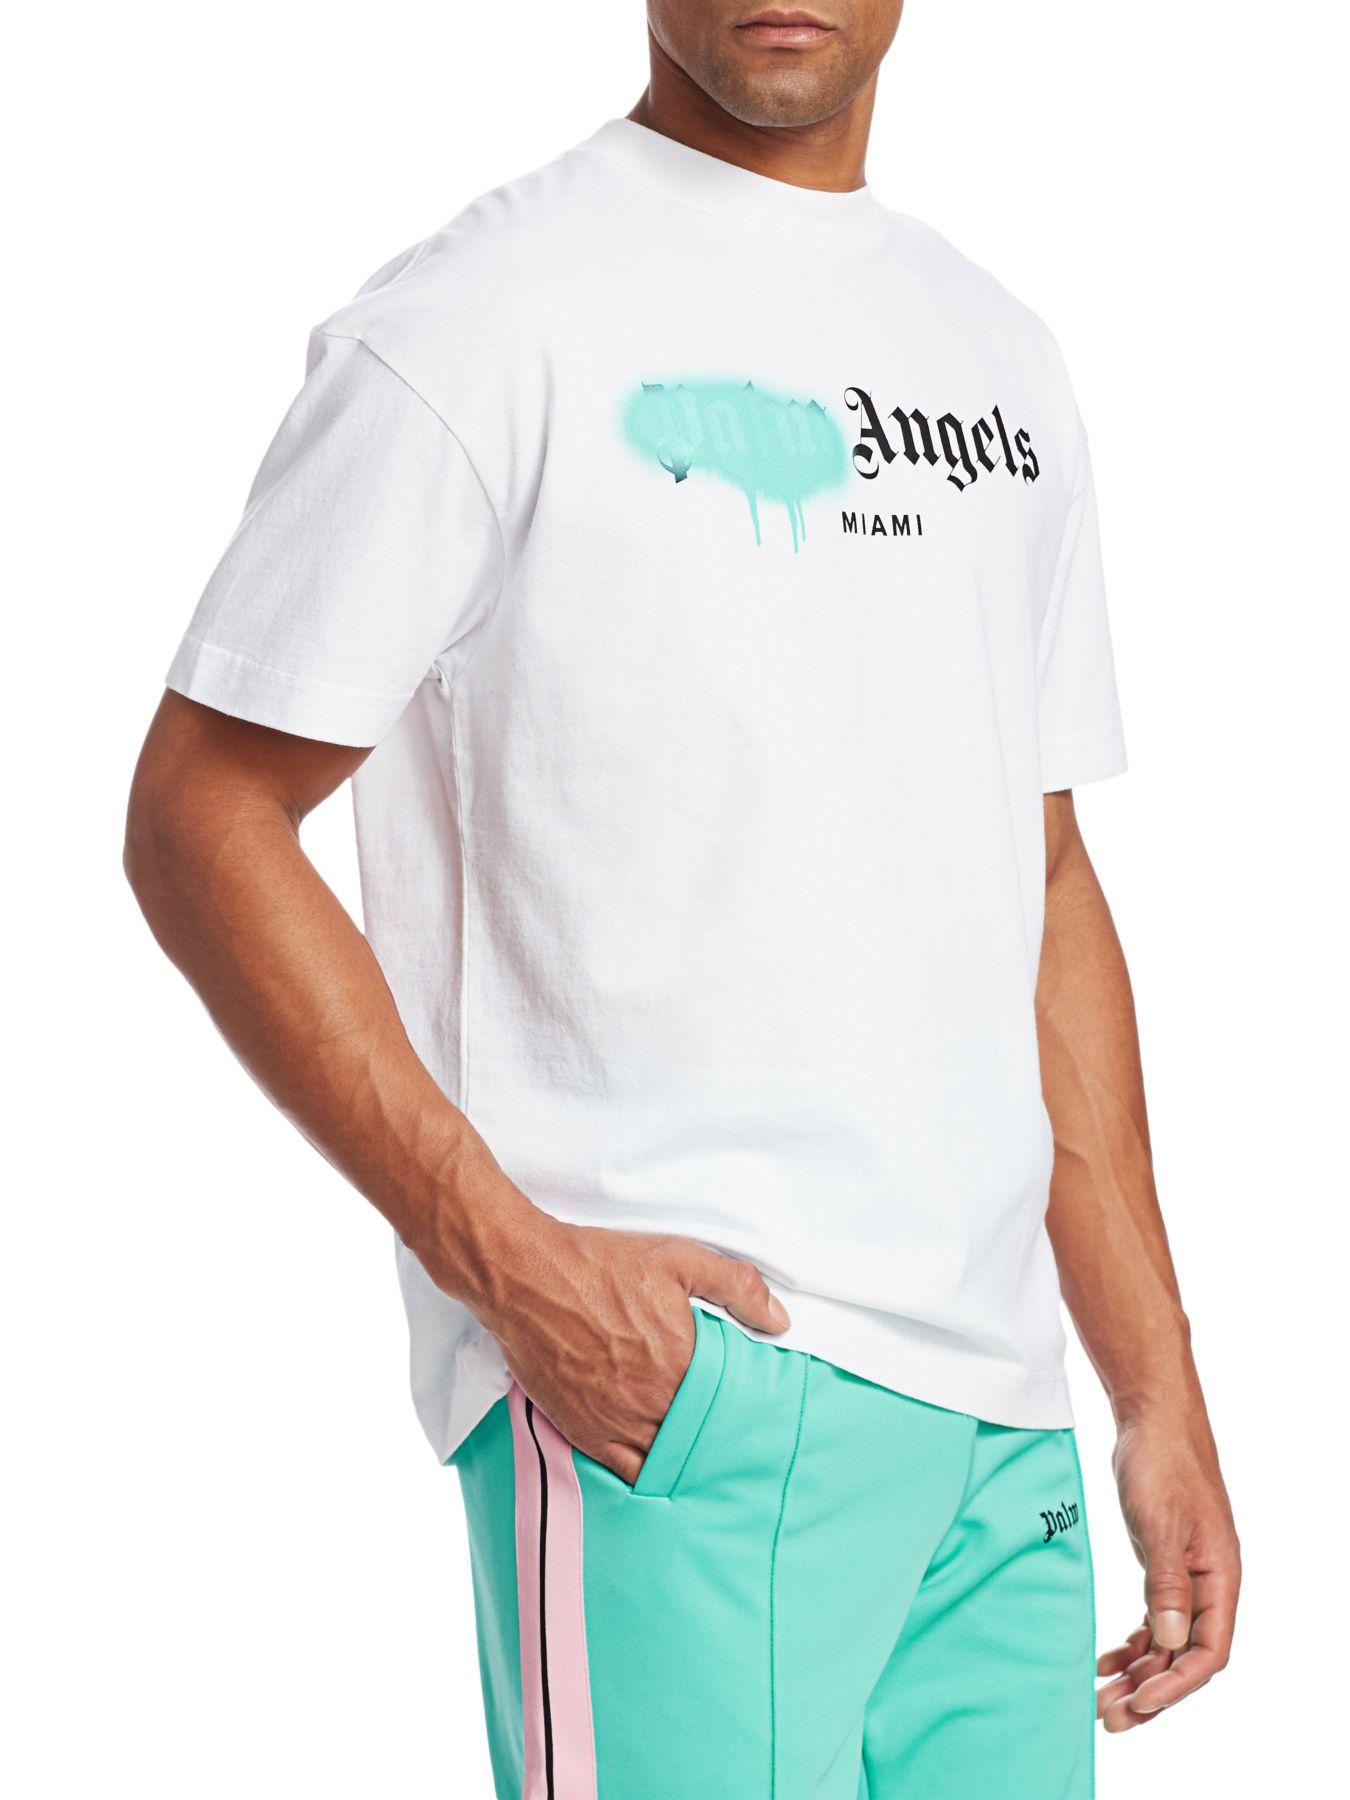 Palm Angels Cotton Capsule Spray Logo Tee in White for Men - Lyst